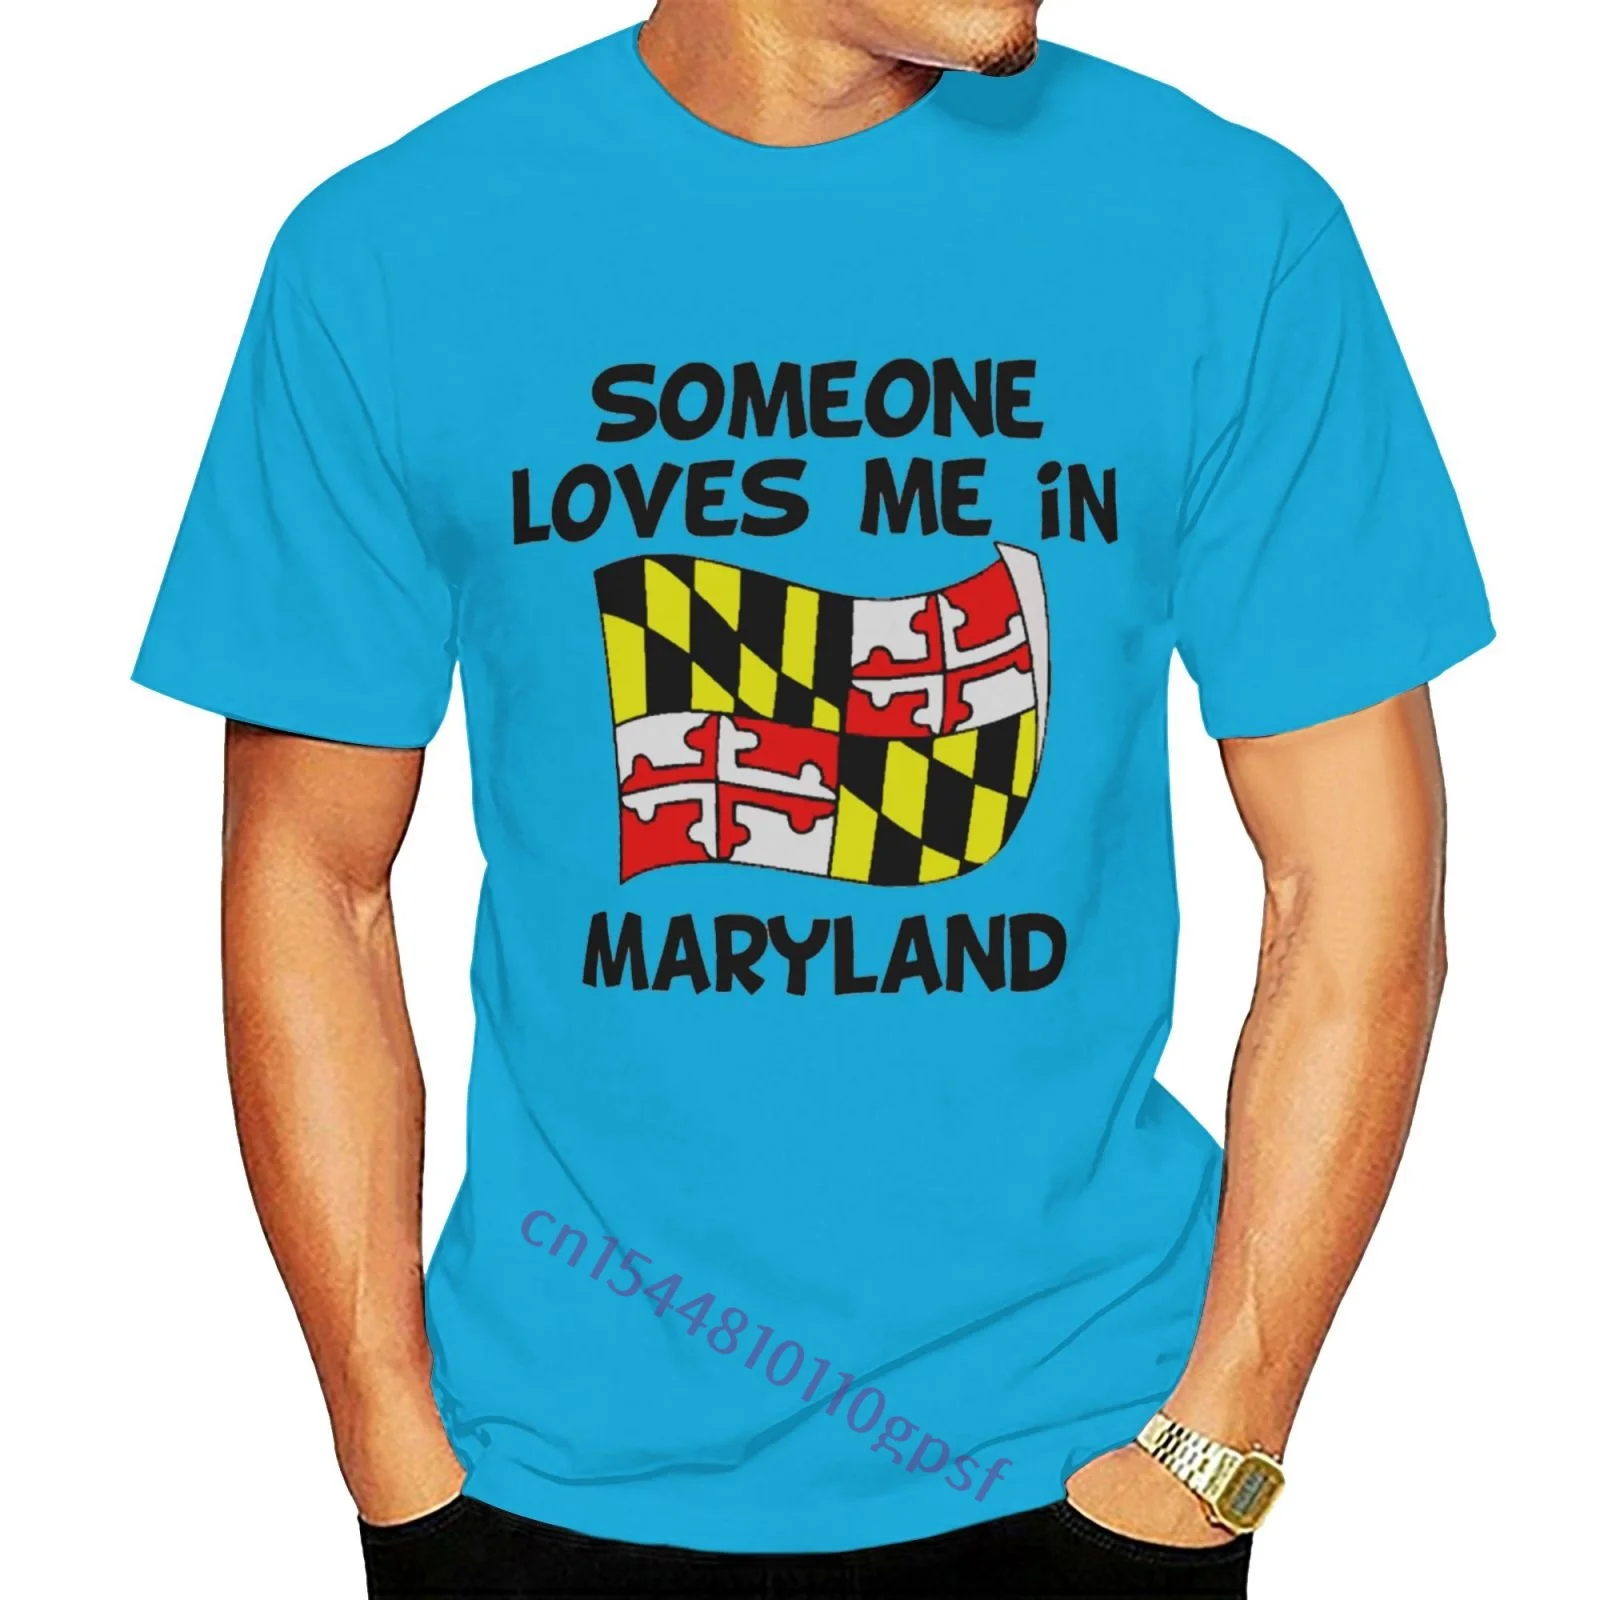 

Someone In Maryland Loves Me Spider Baby Blue T-shirt Men T Shirt Round Collar Short Sleeve Tee Shirts Top Tee